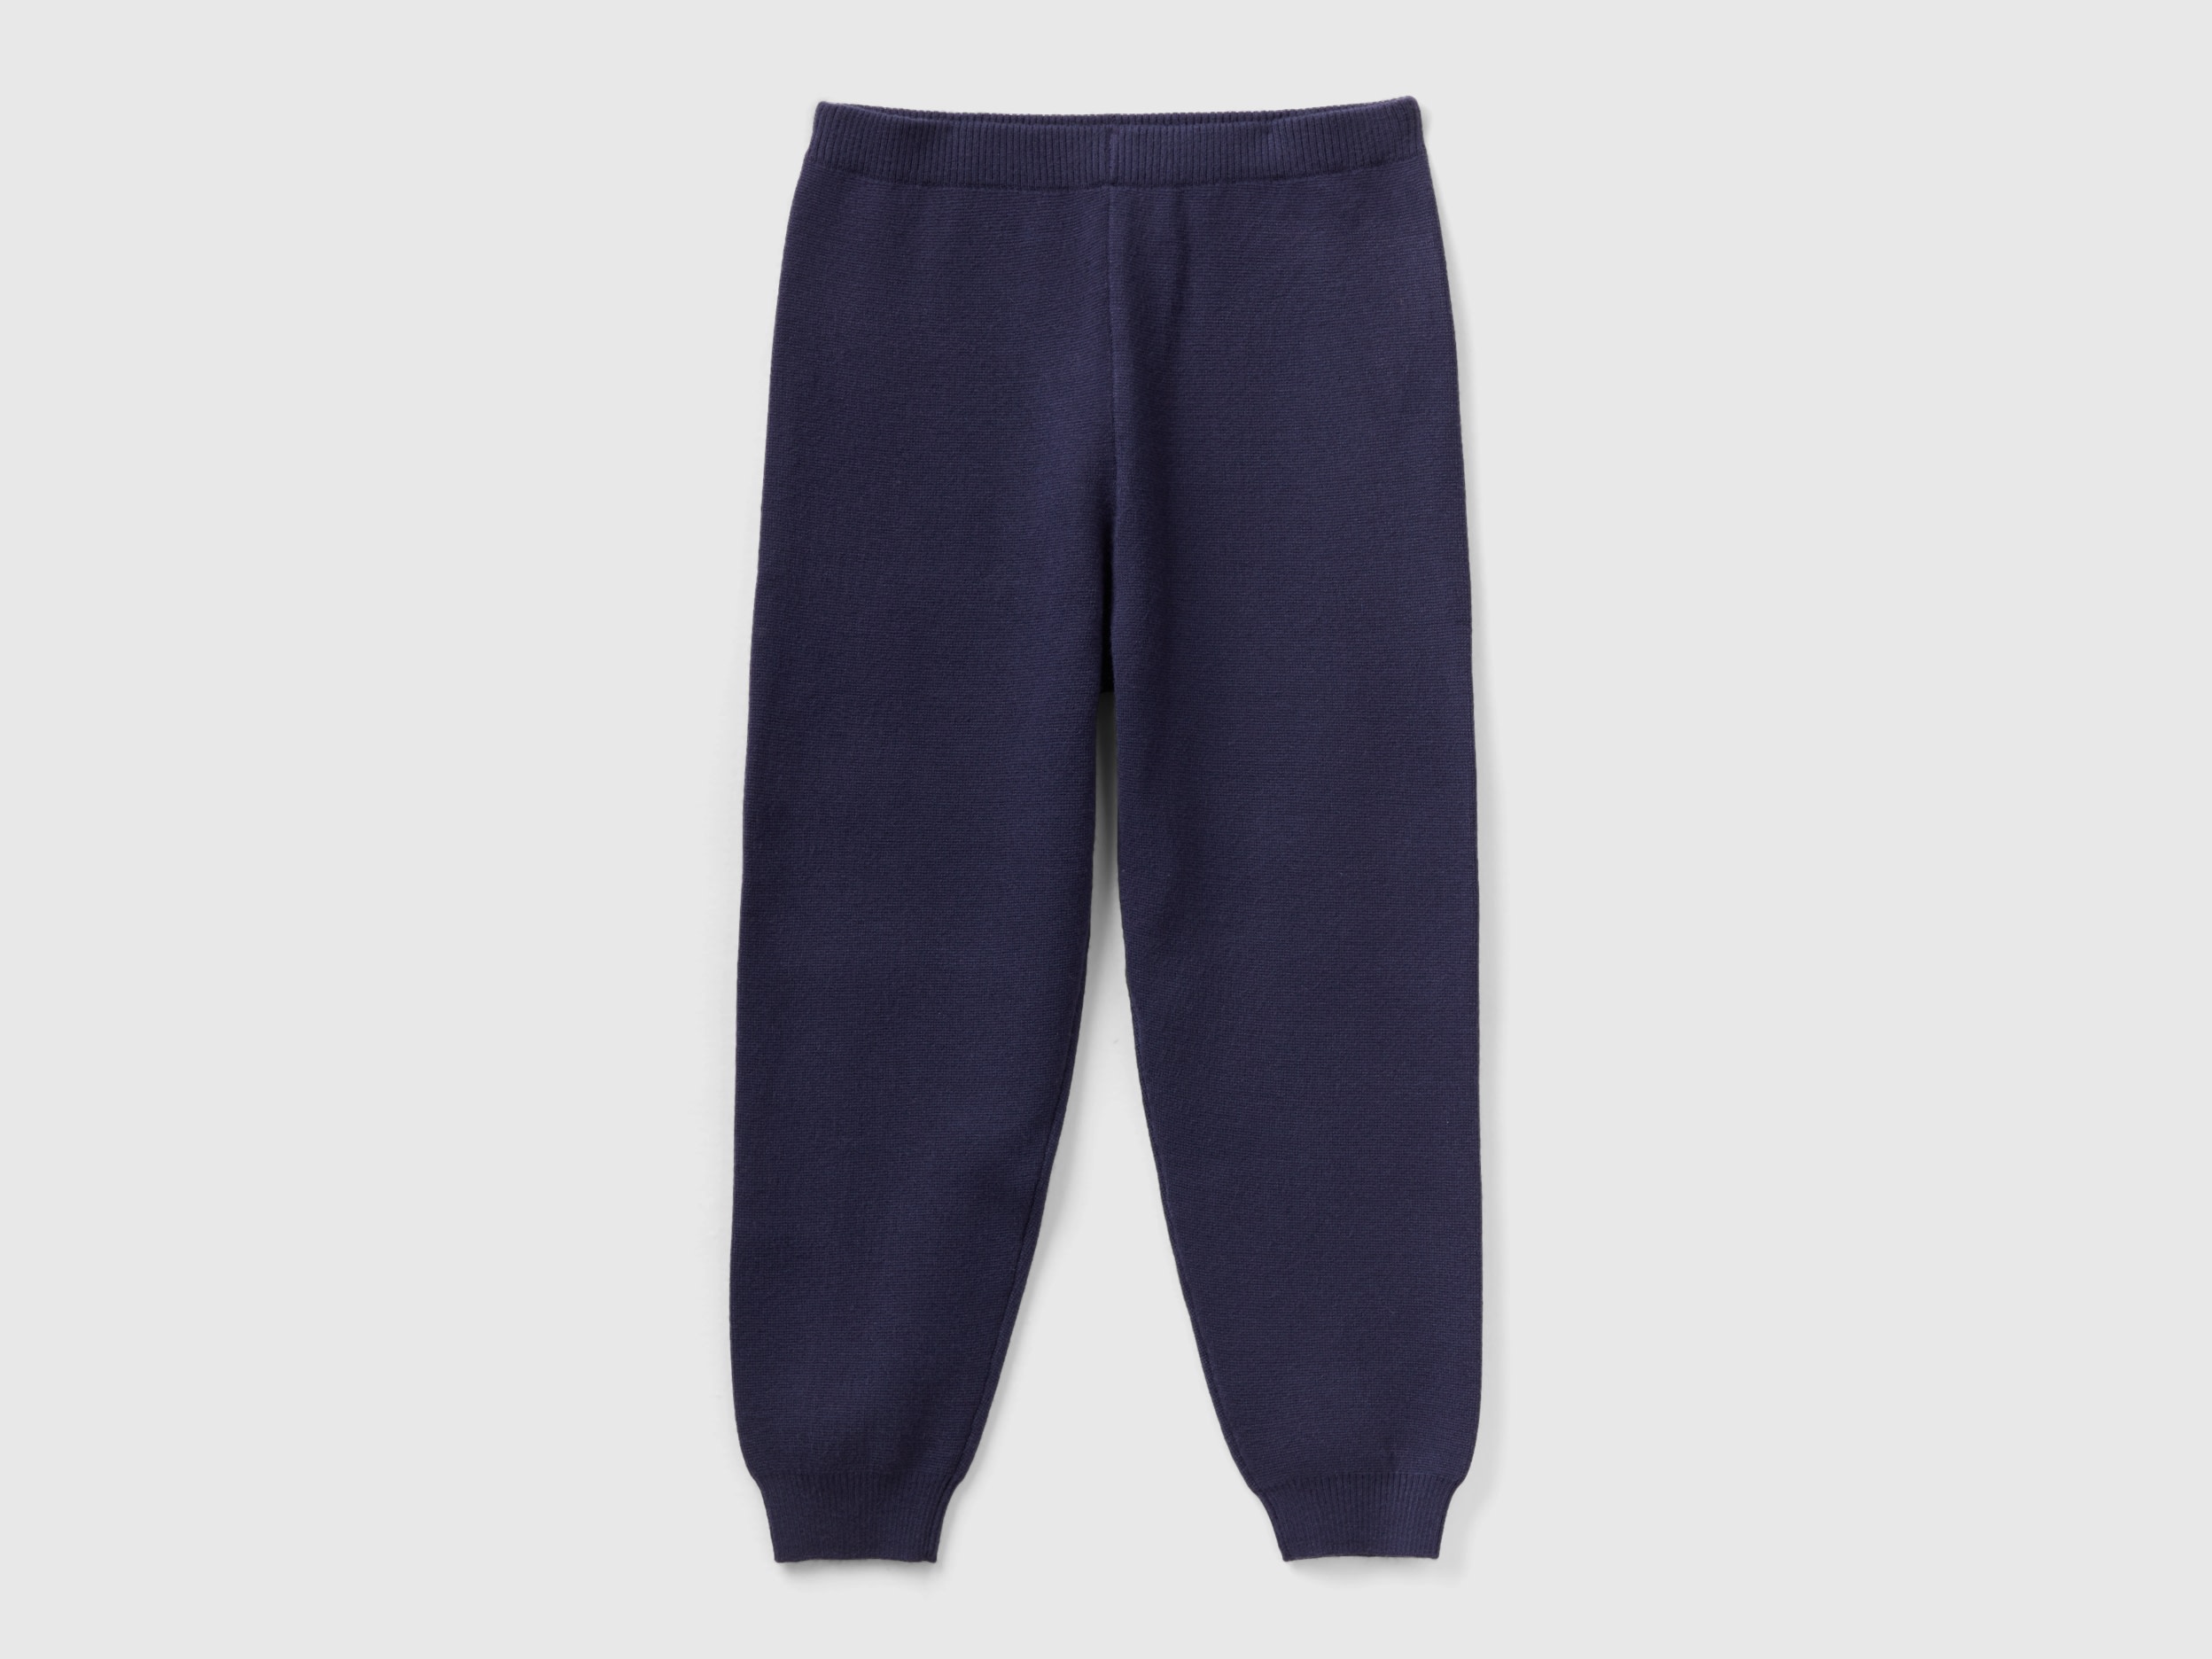 Benetton, Knit Trousers With Drawstring, size L, Dark Blue, Kids